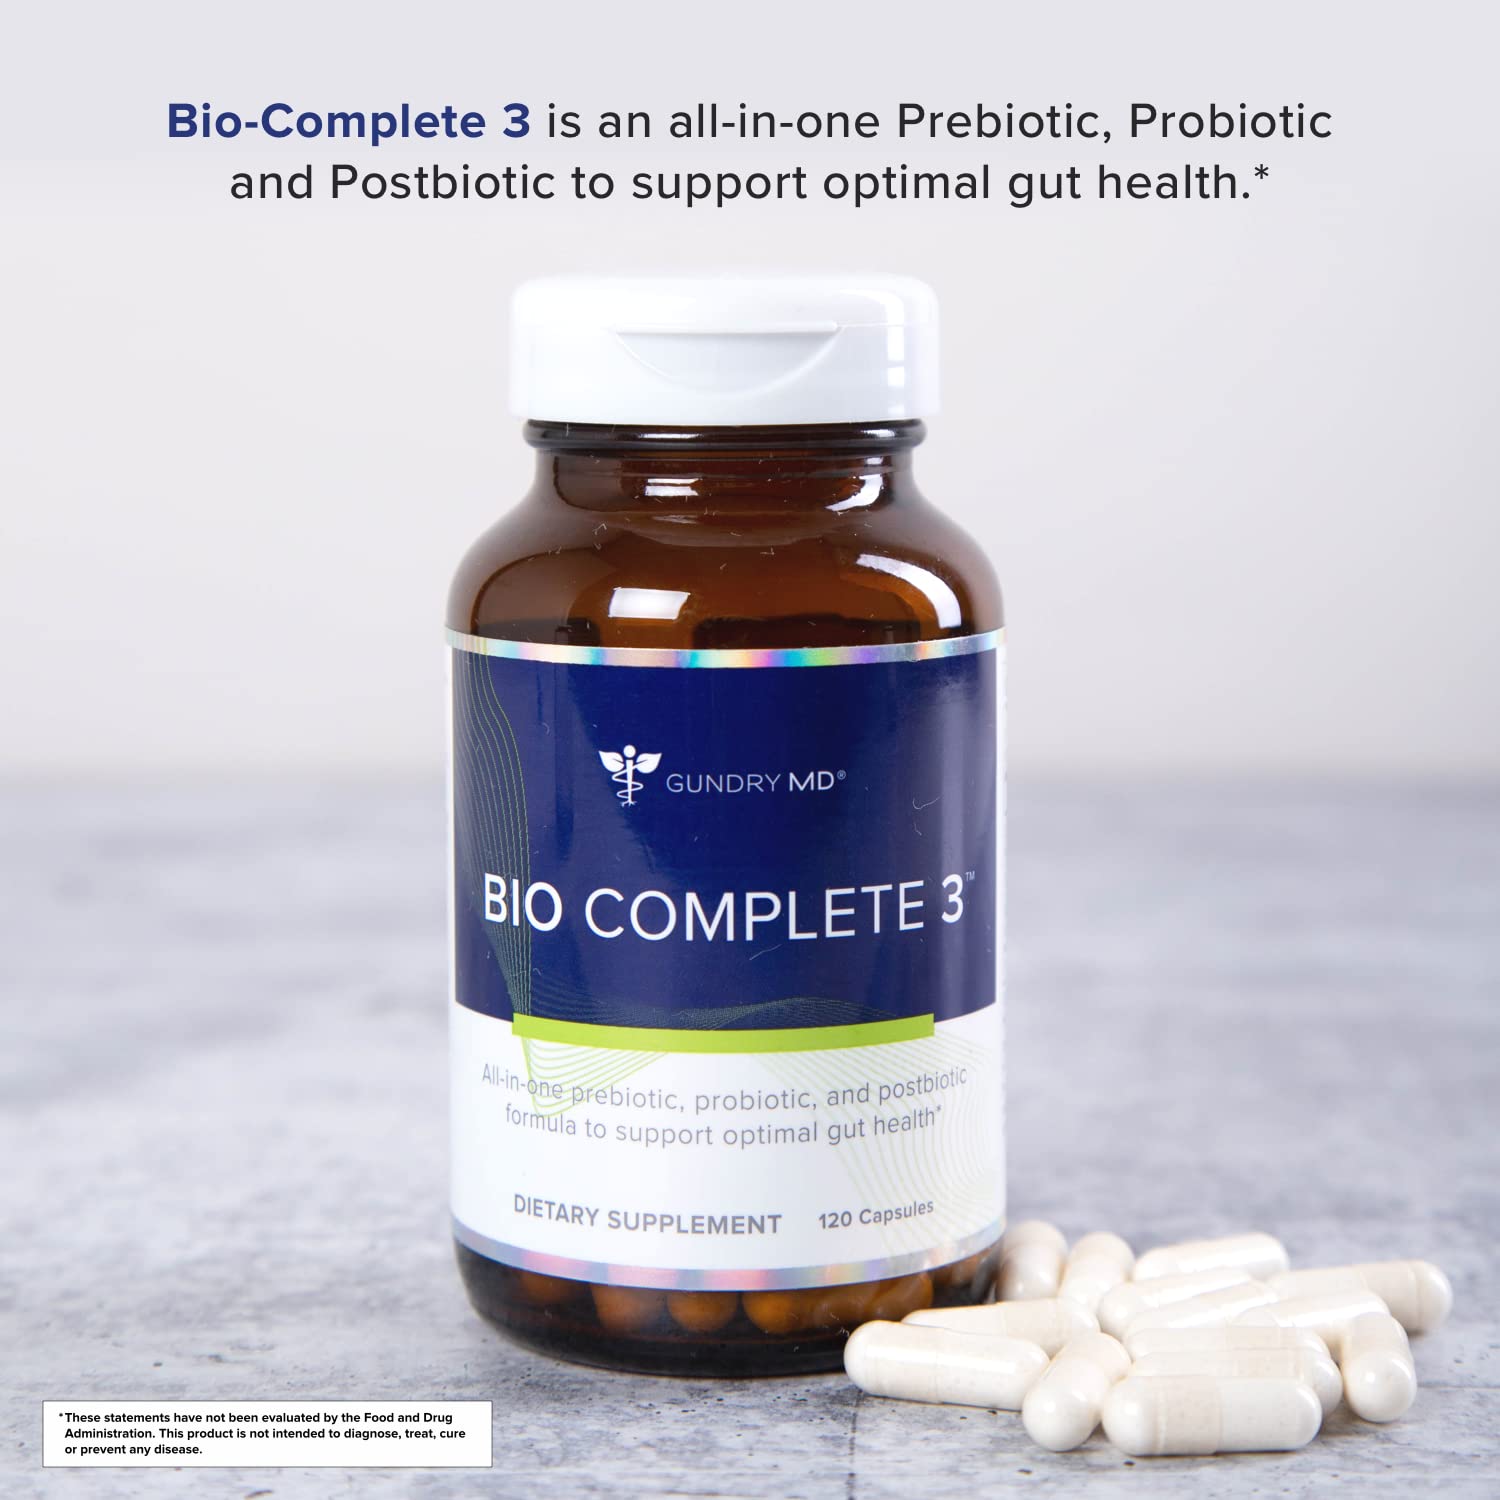 Gundry MD® Bio Complete 3 - Prebiotic, Probiotic, Postbiotic to Support Optimal Gut Health, 30 Day Supply